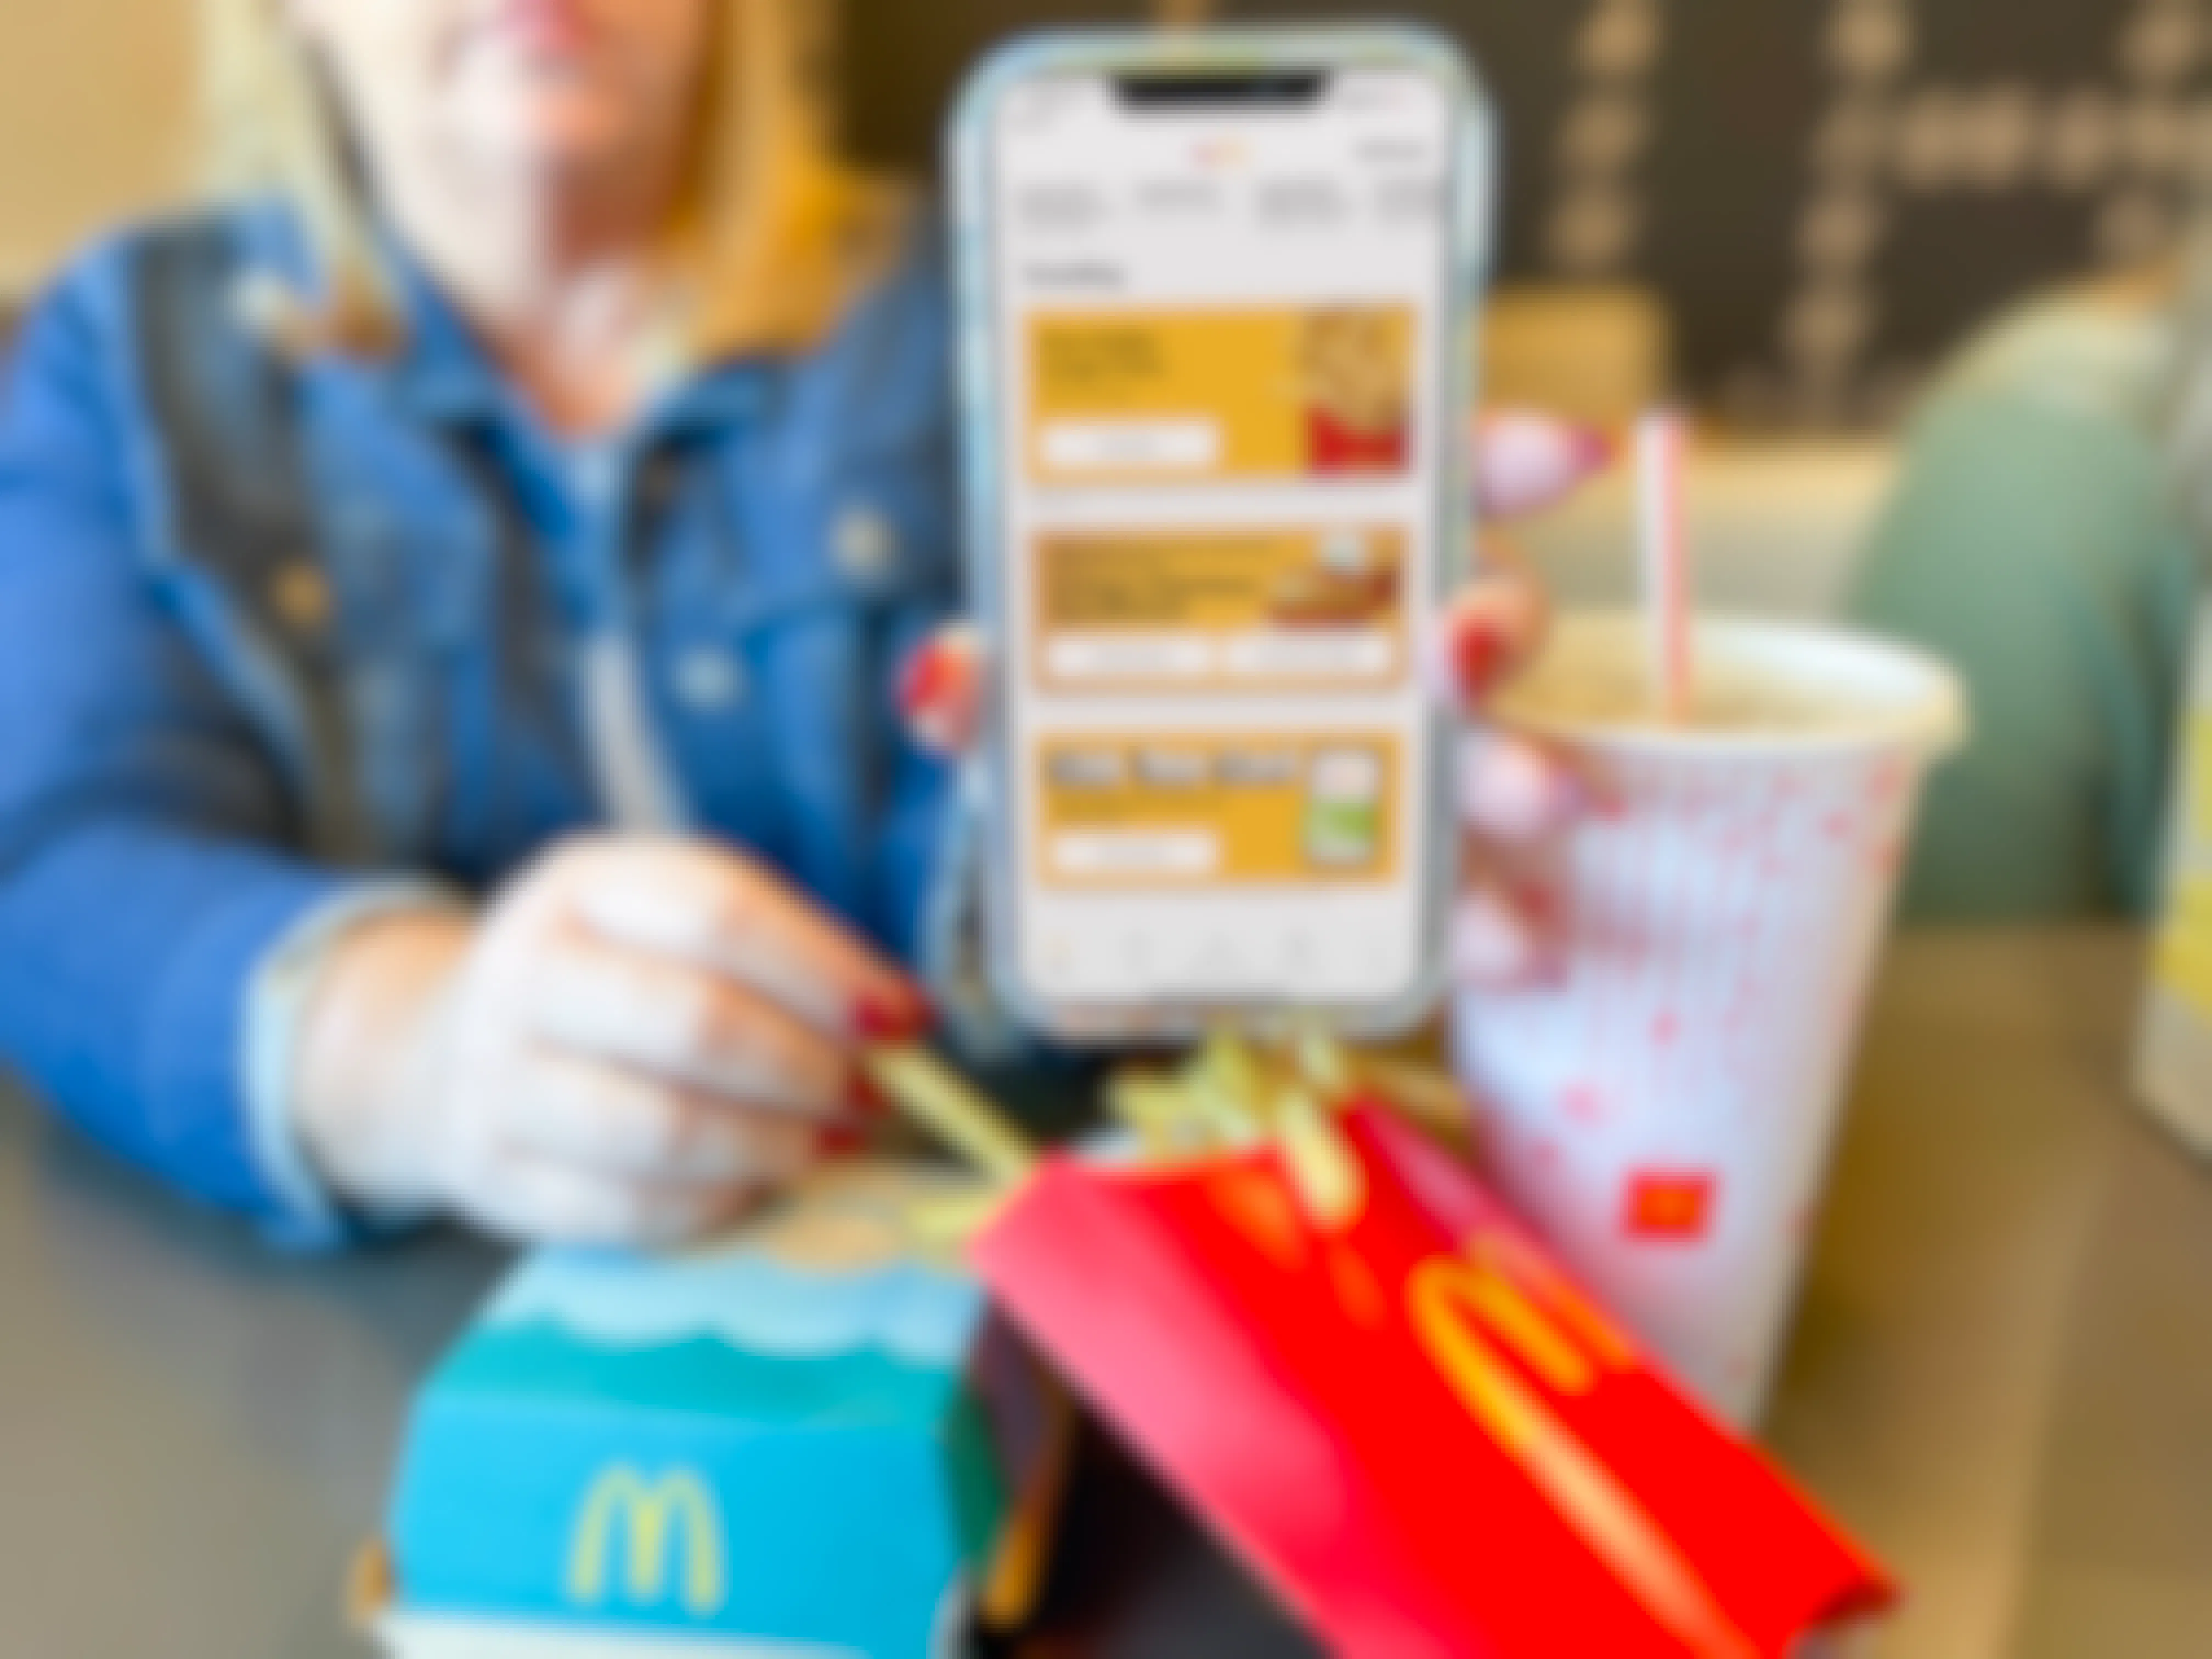 chick-fil-a- vs. mcdonald's - women holding cellphone with mcdonalds app in front of meal